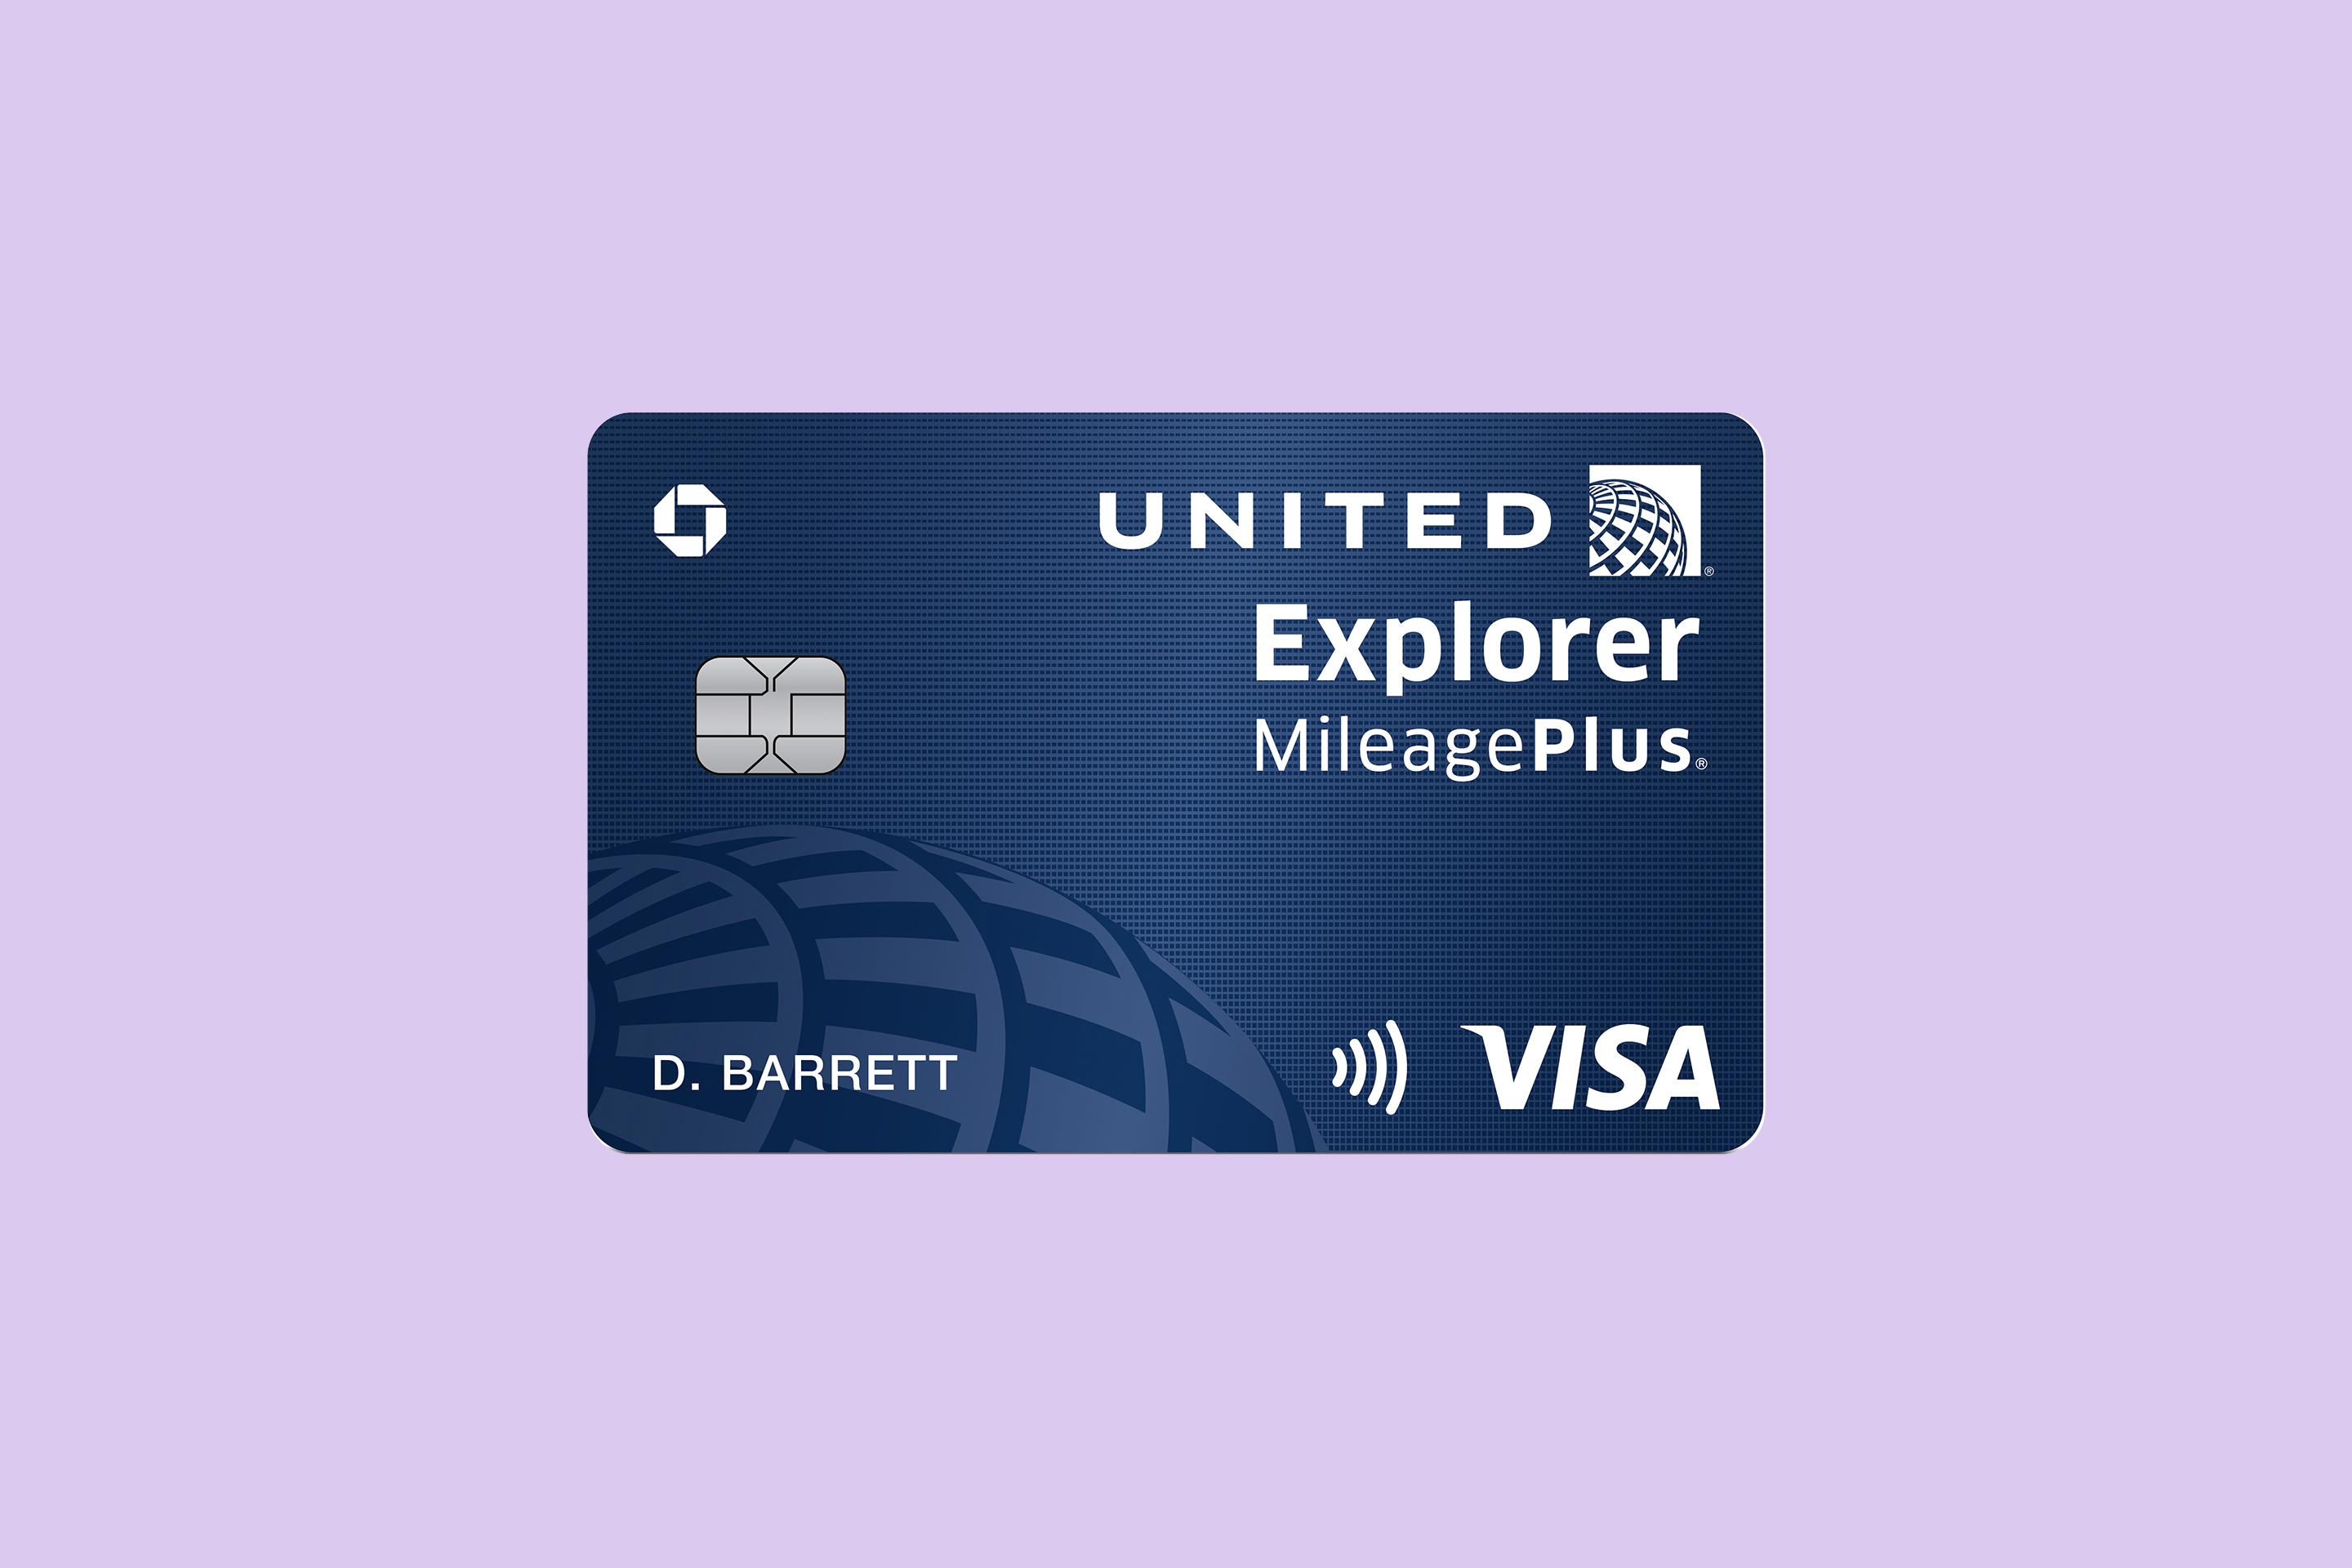 United Explorer Mileage Plus Credit Card by Chase